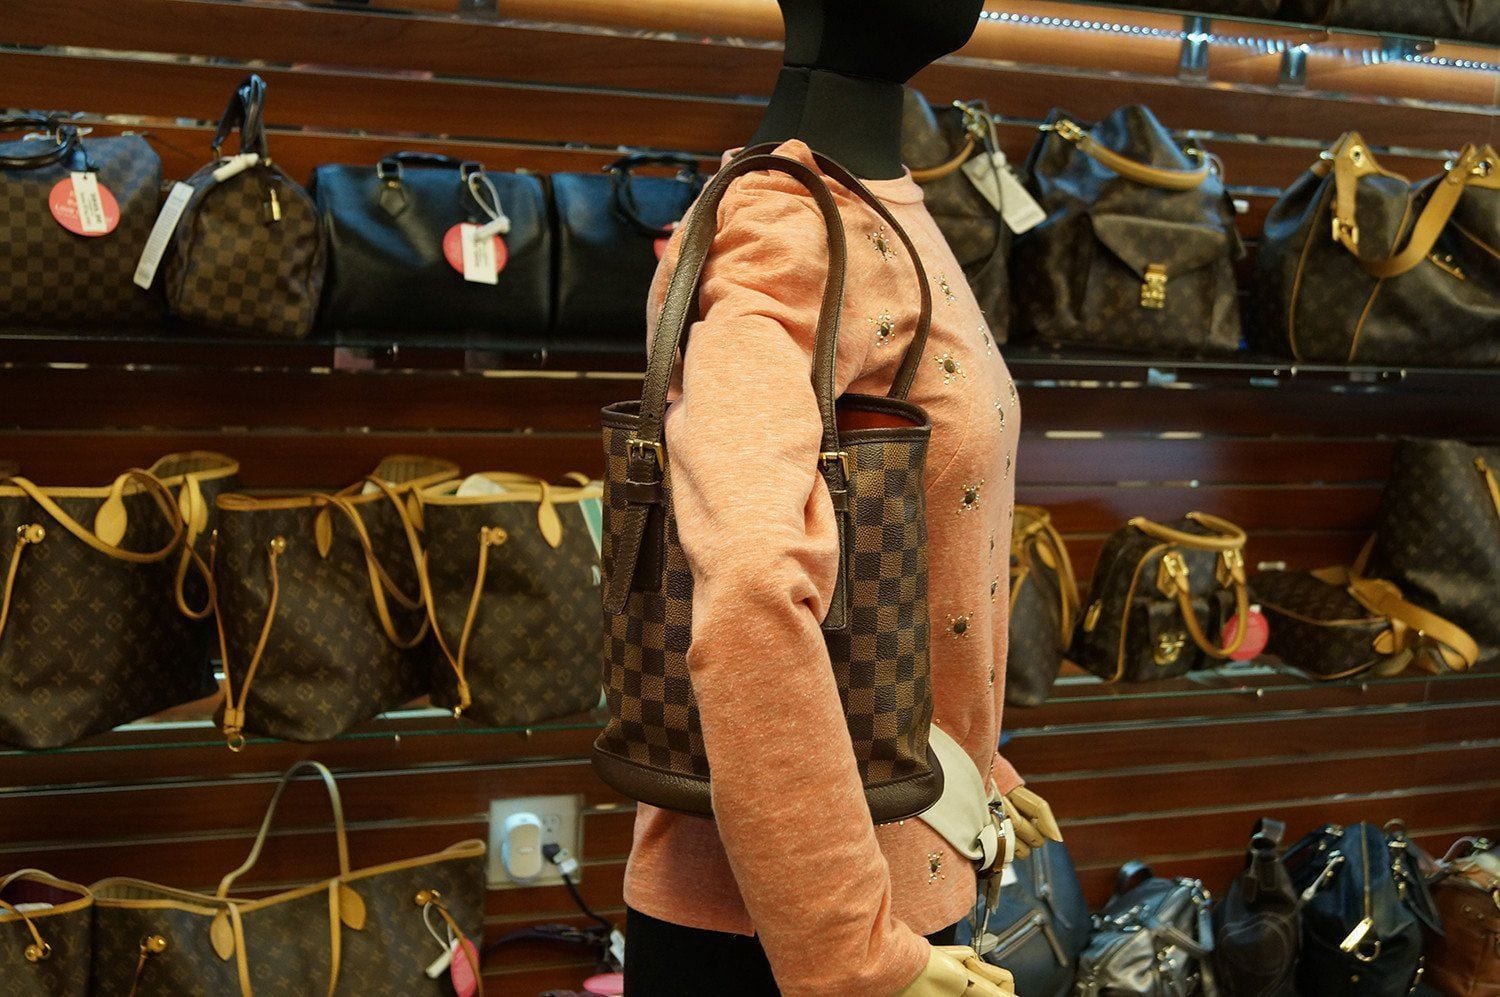 Second Hand Louis Vuitton Bags In Tokyo Japan